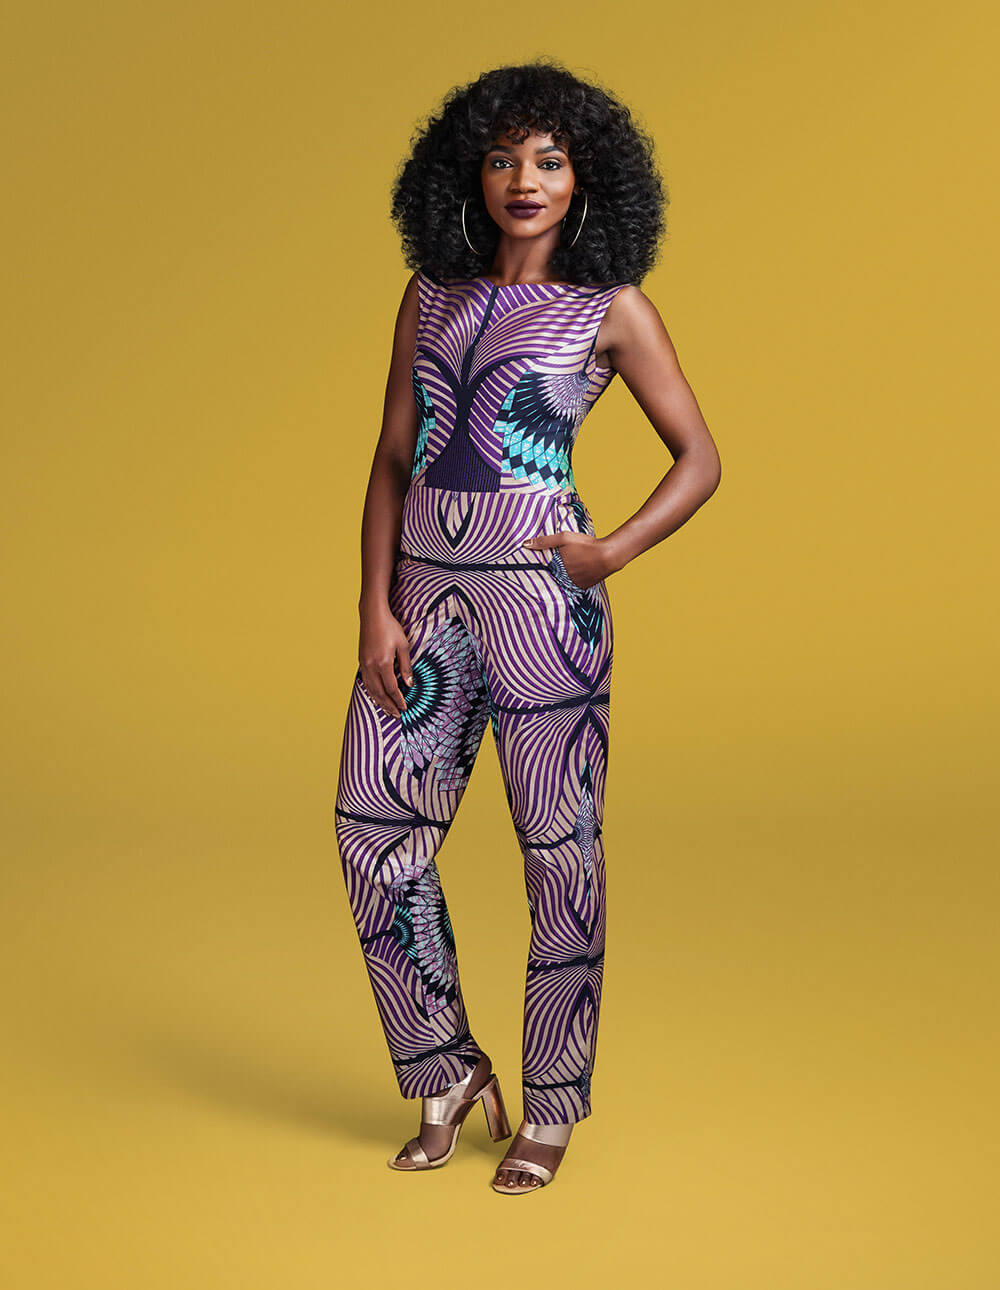 Sixties fabric - Sixties Sweetheart - African Fashion | African styles